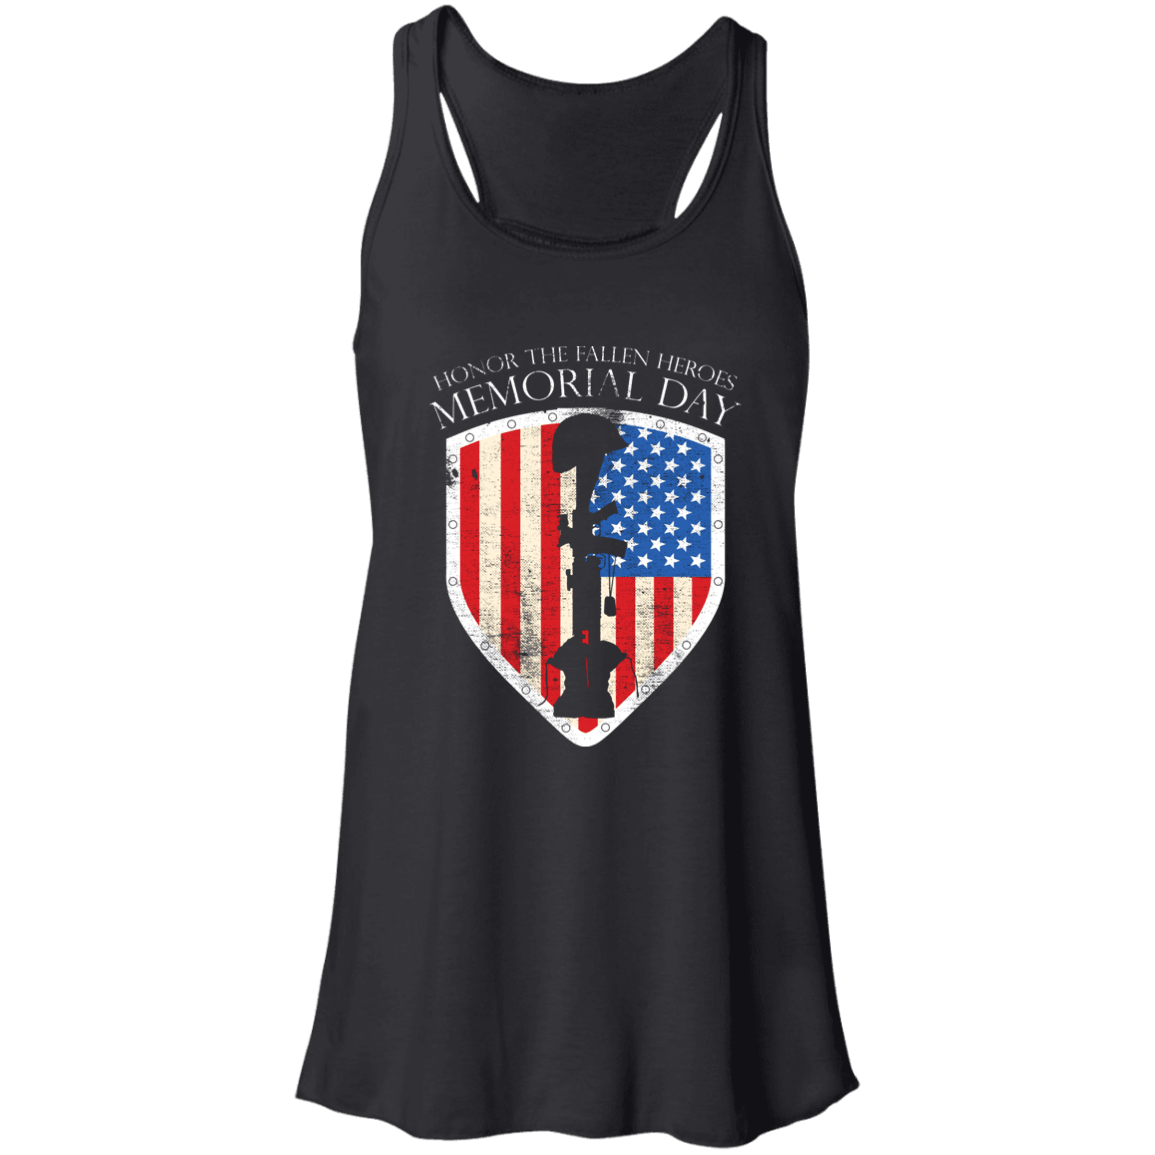 Designs by MyUtopia Shout Out:Honor The Fallen Heroes Ladies Flowy Racerback Tank,X-Small / Black,Tank Tops